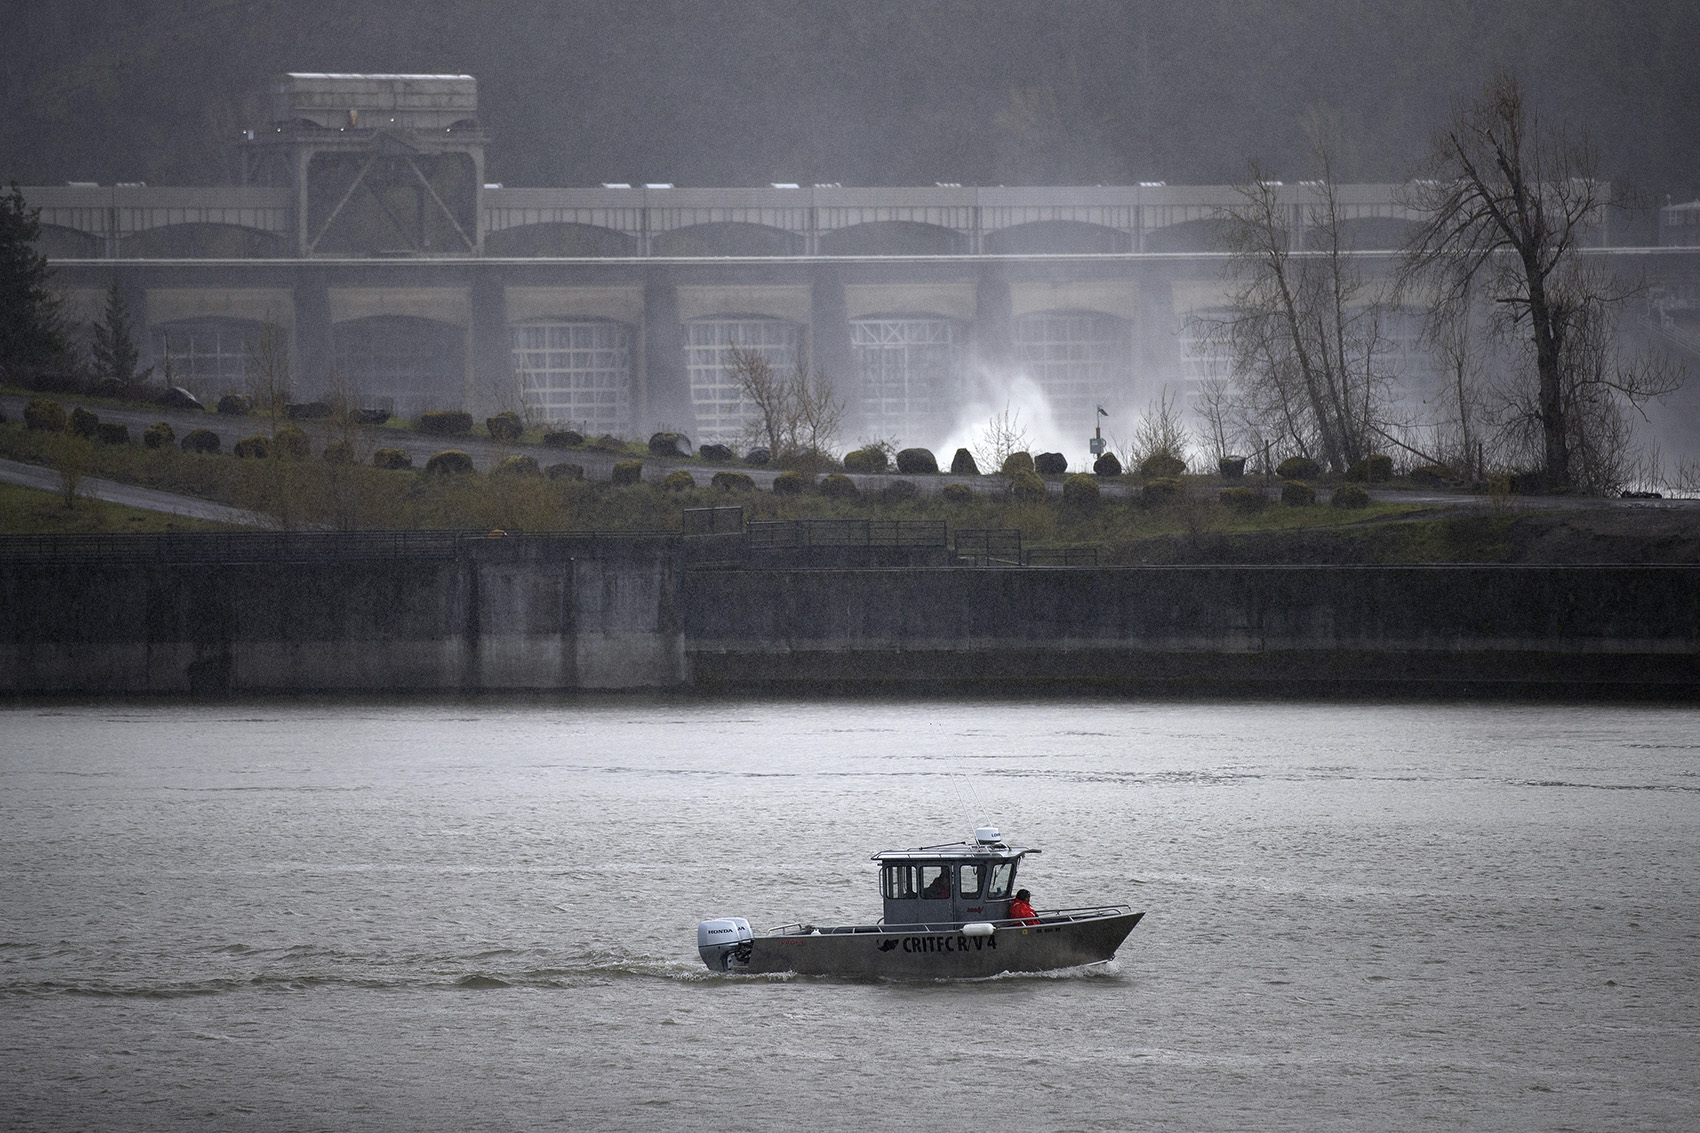 KUOW - Bombs, guns and sea lions on the Columbia River